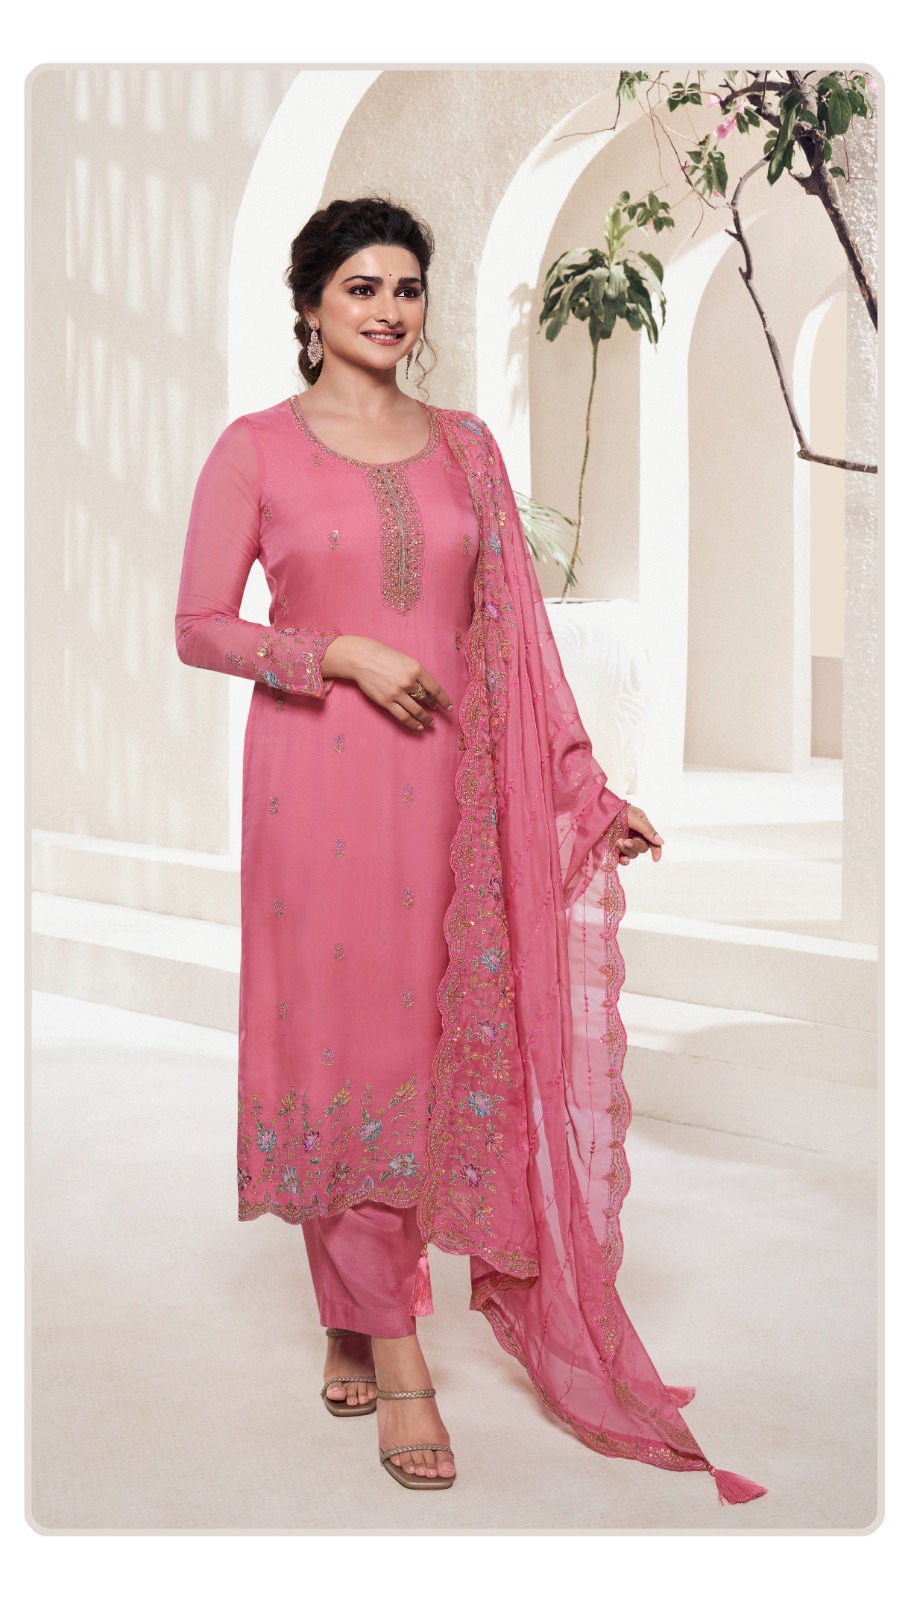 Vinay Kanishka 66756 - Multi Thread Embroidered Organza With Hand Work Suit